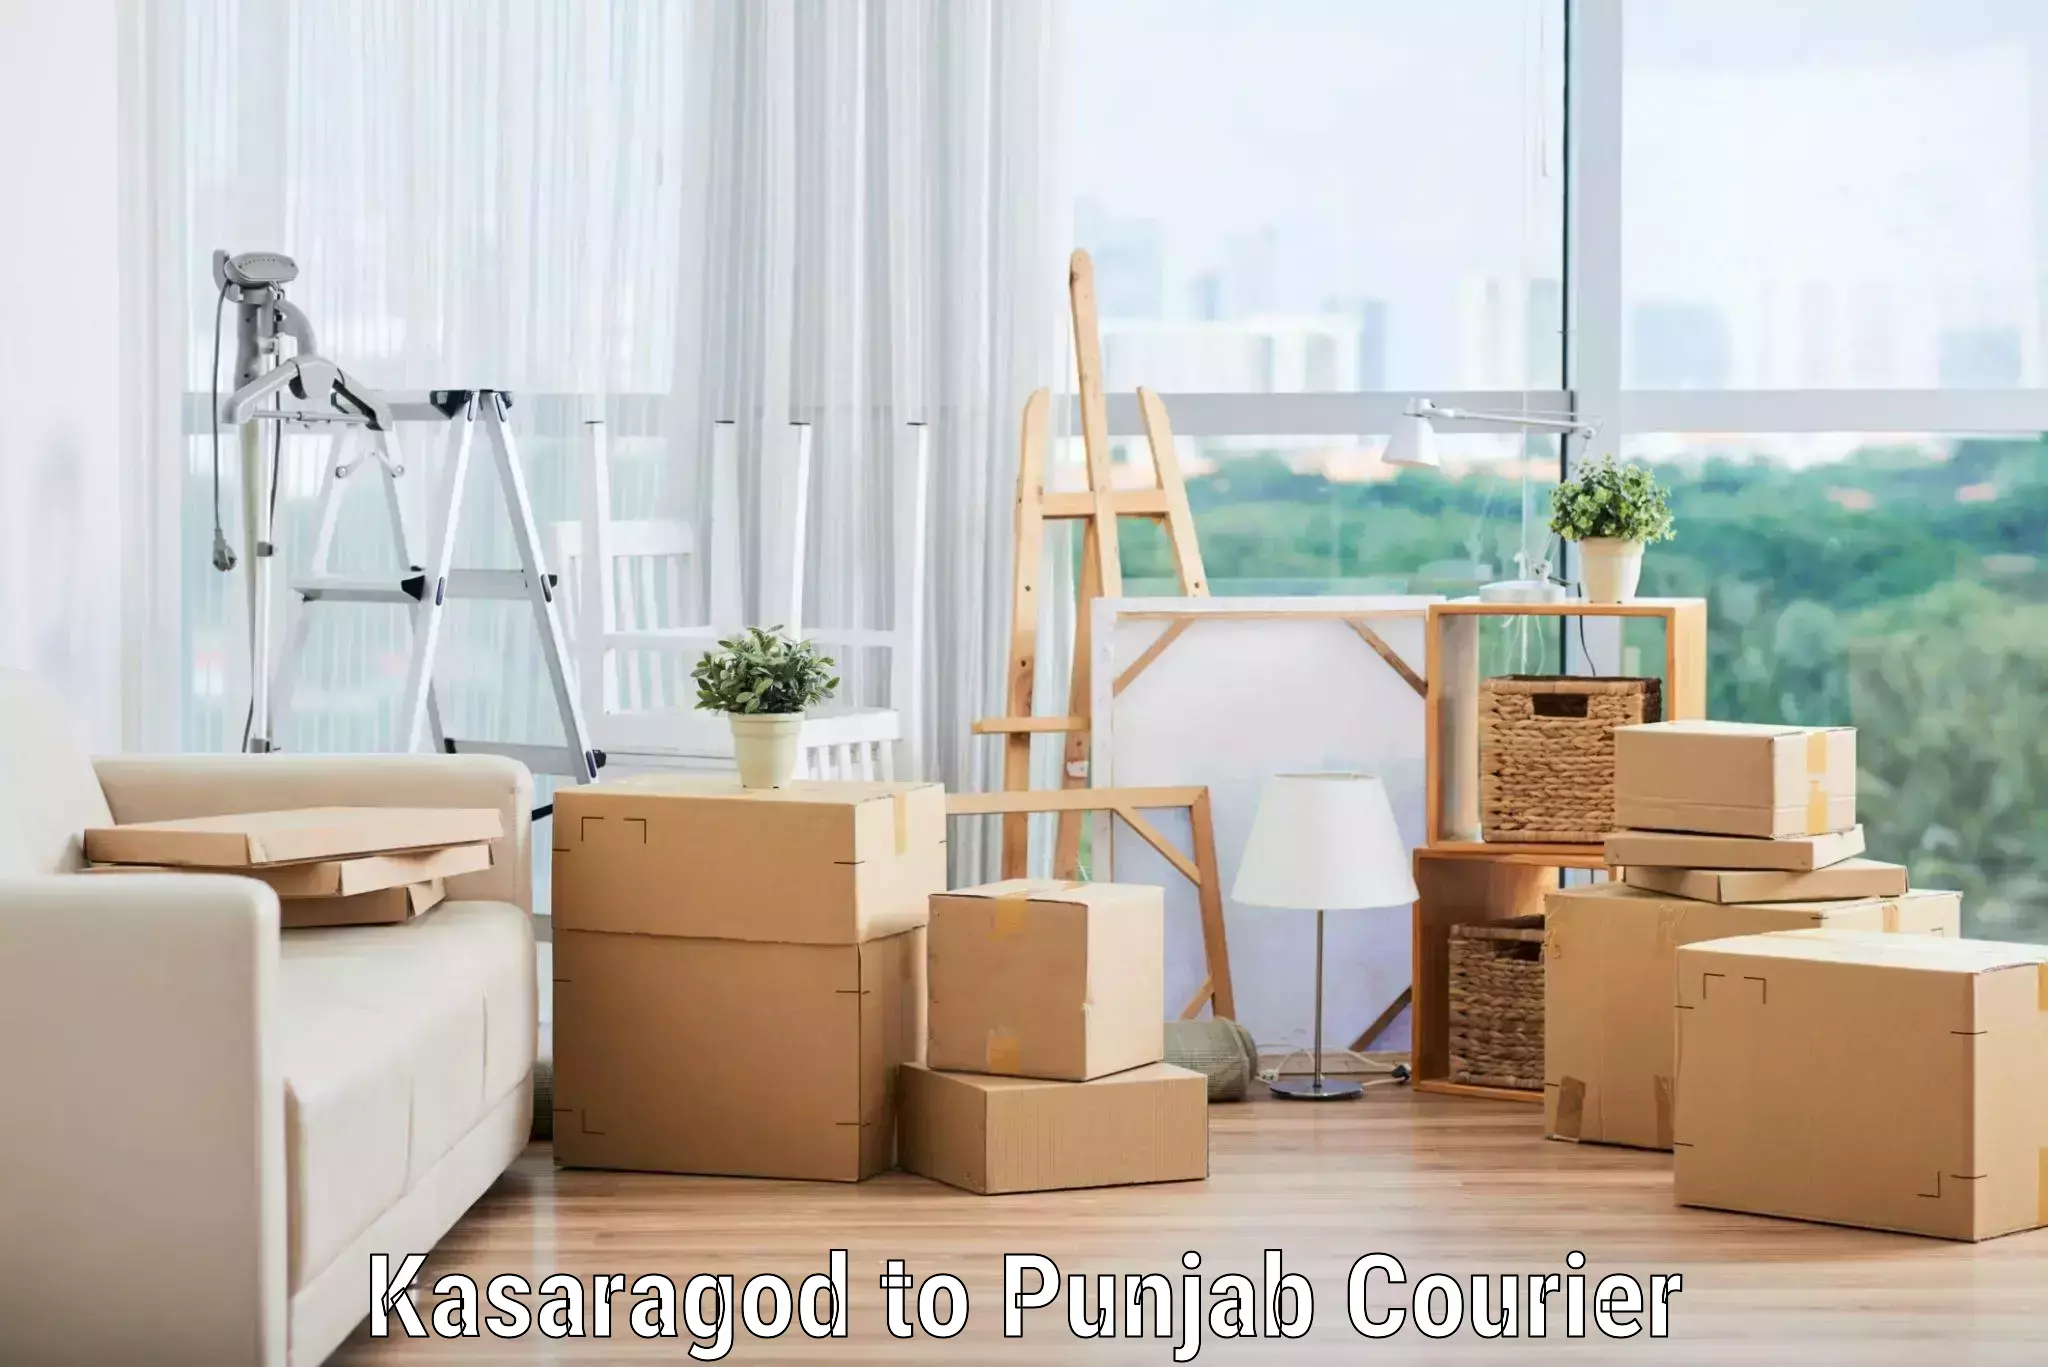 Trusted relocation experts Kasaragod to Nawanshahr